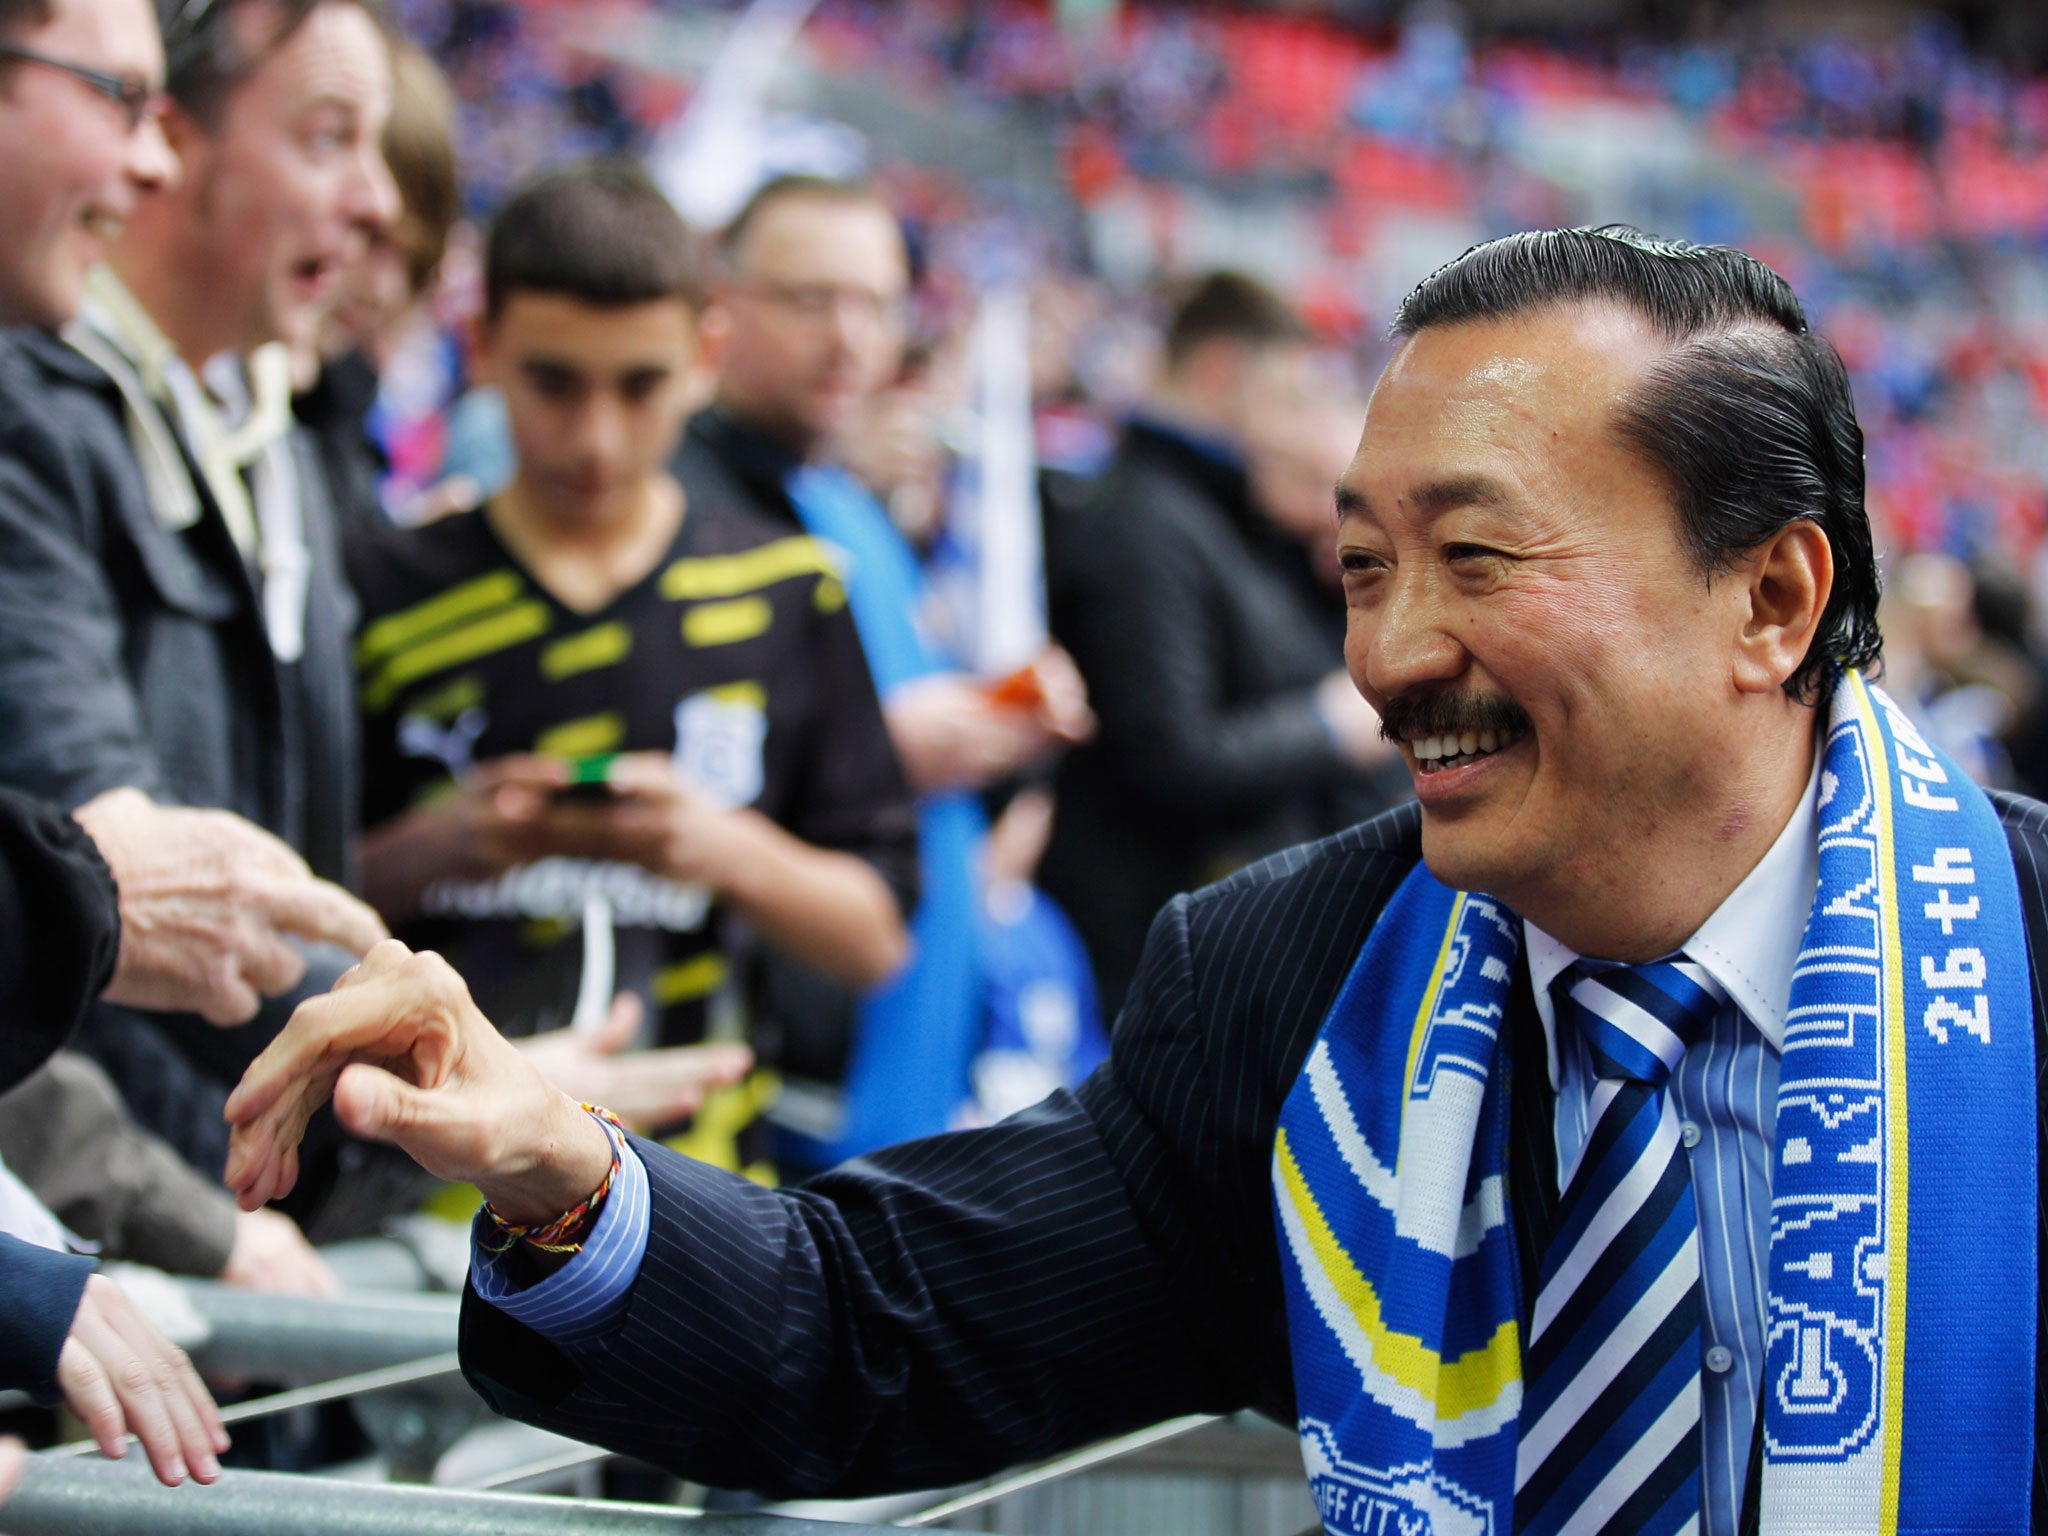 Cardiff City’s owner Vincent Tan greets fans